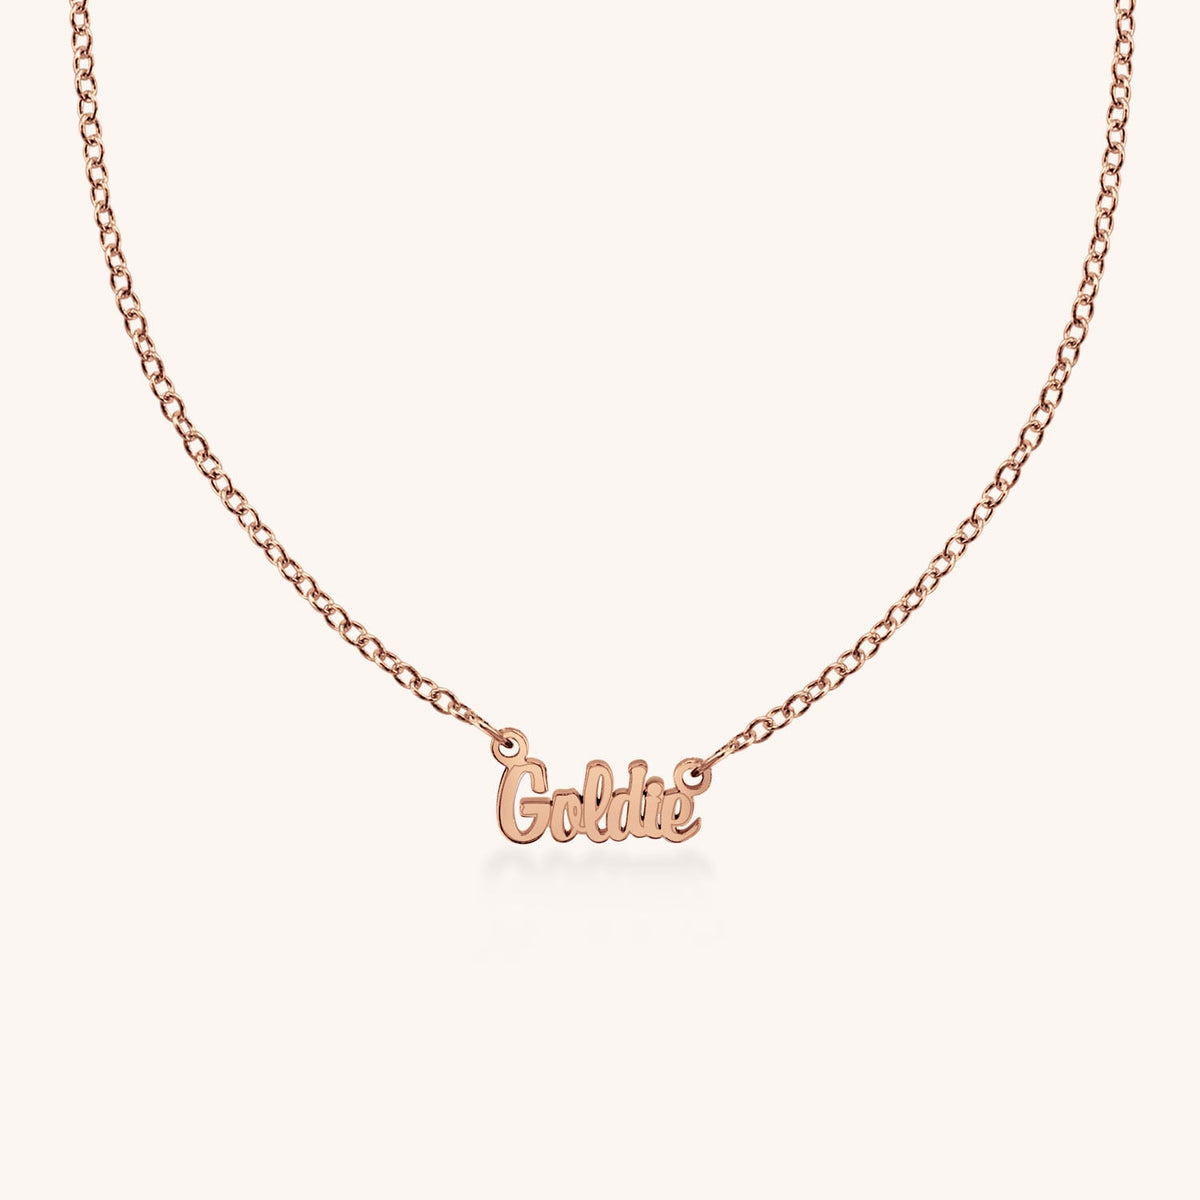 14k Gold Goldie Nameplate Necklace